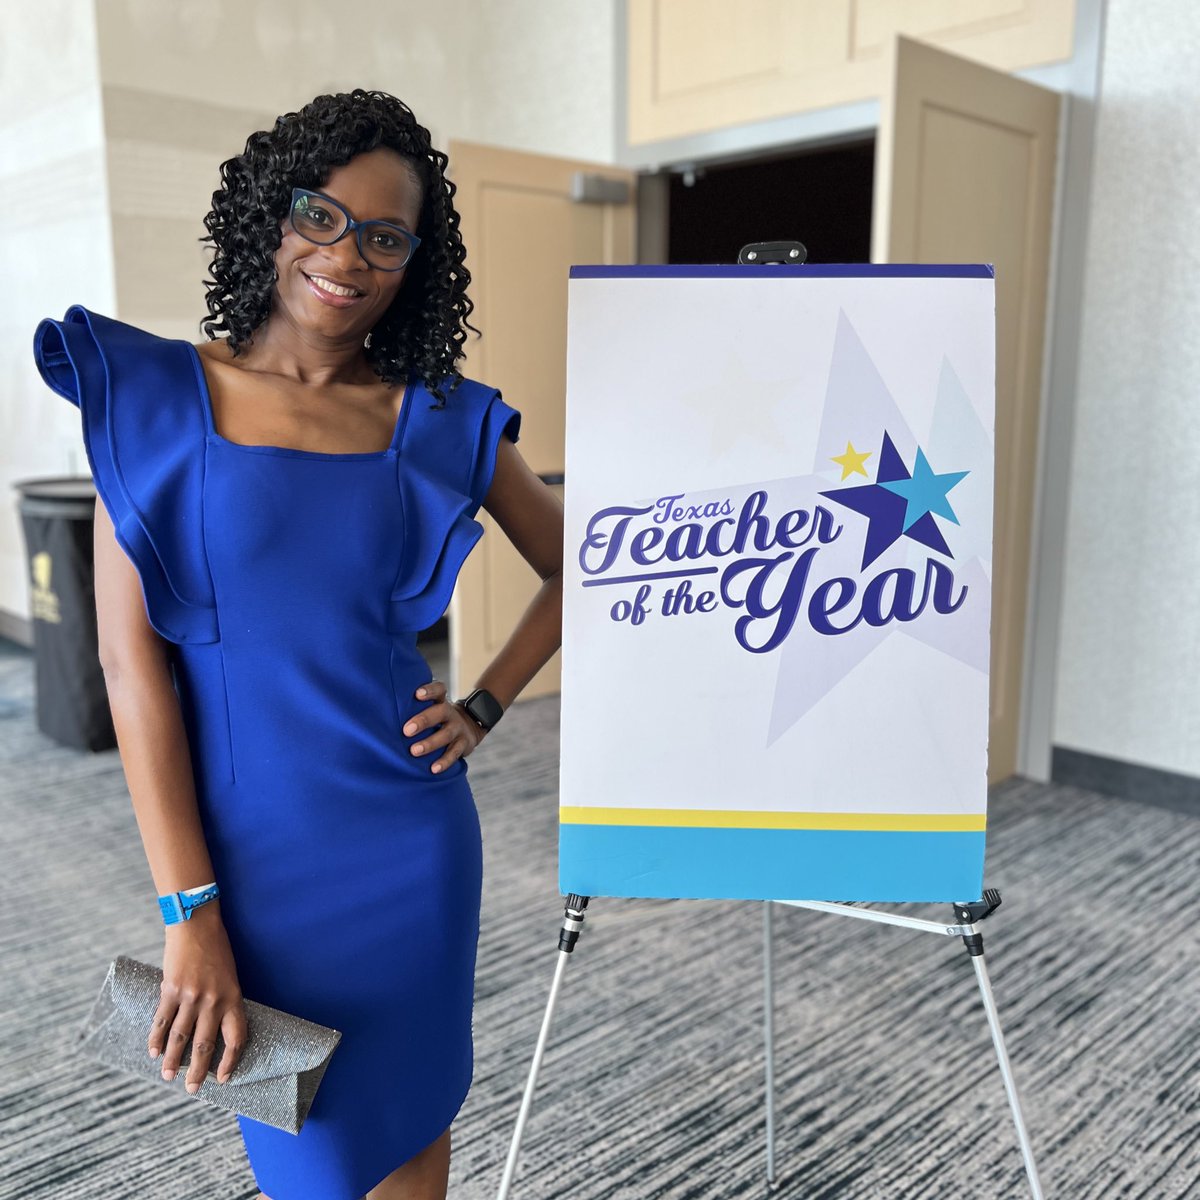 Want to keep up with our 2024 Texas Teacher of the Year? Follow @taniecetsmith24 to join her journey as she represents Texas in the national teacher of the year competition! 🌟

Learn more about Taniece here: tasanet.org/tasa-names-202…

#txed #TXTOY #InspiringLeaders #TeachersCan